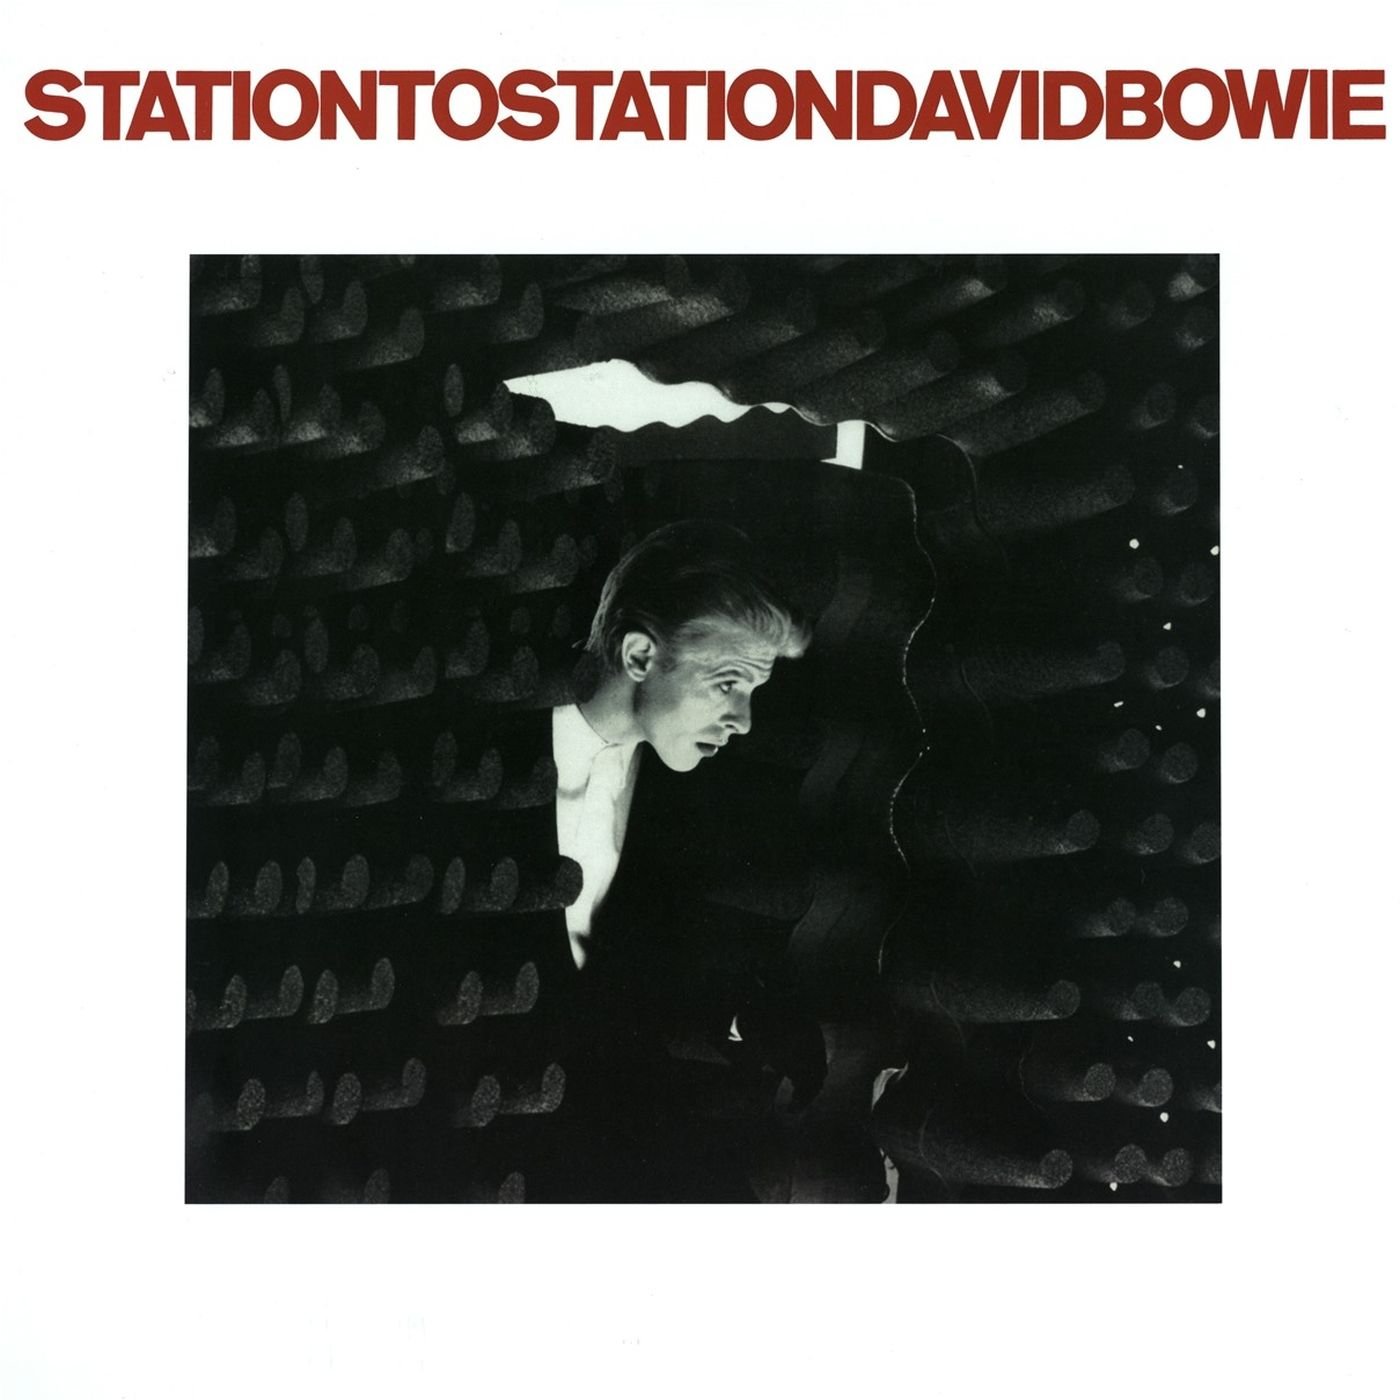 David Bowie – Station to Station - Record Reviews - Stomp And Stammer